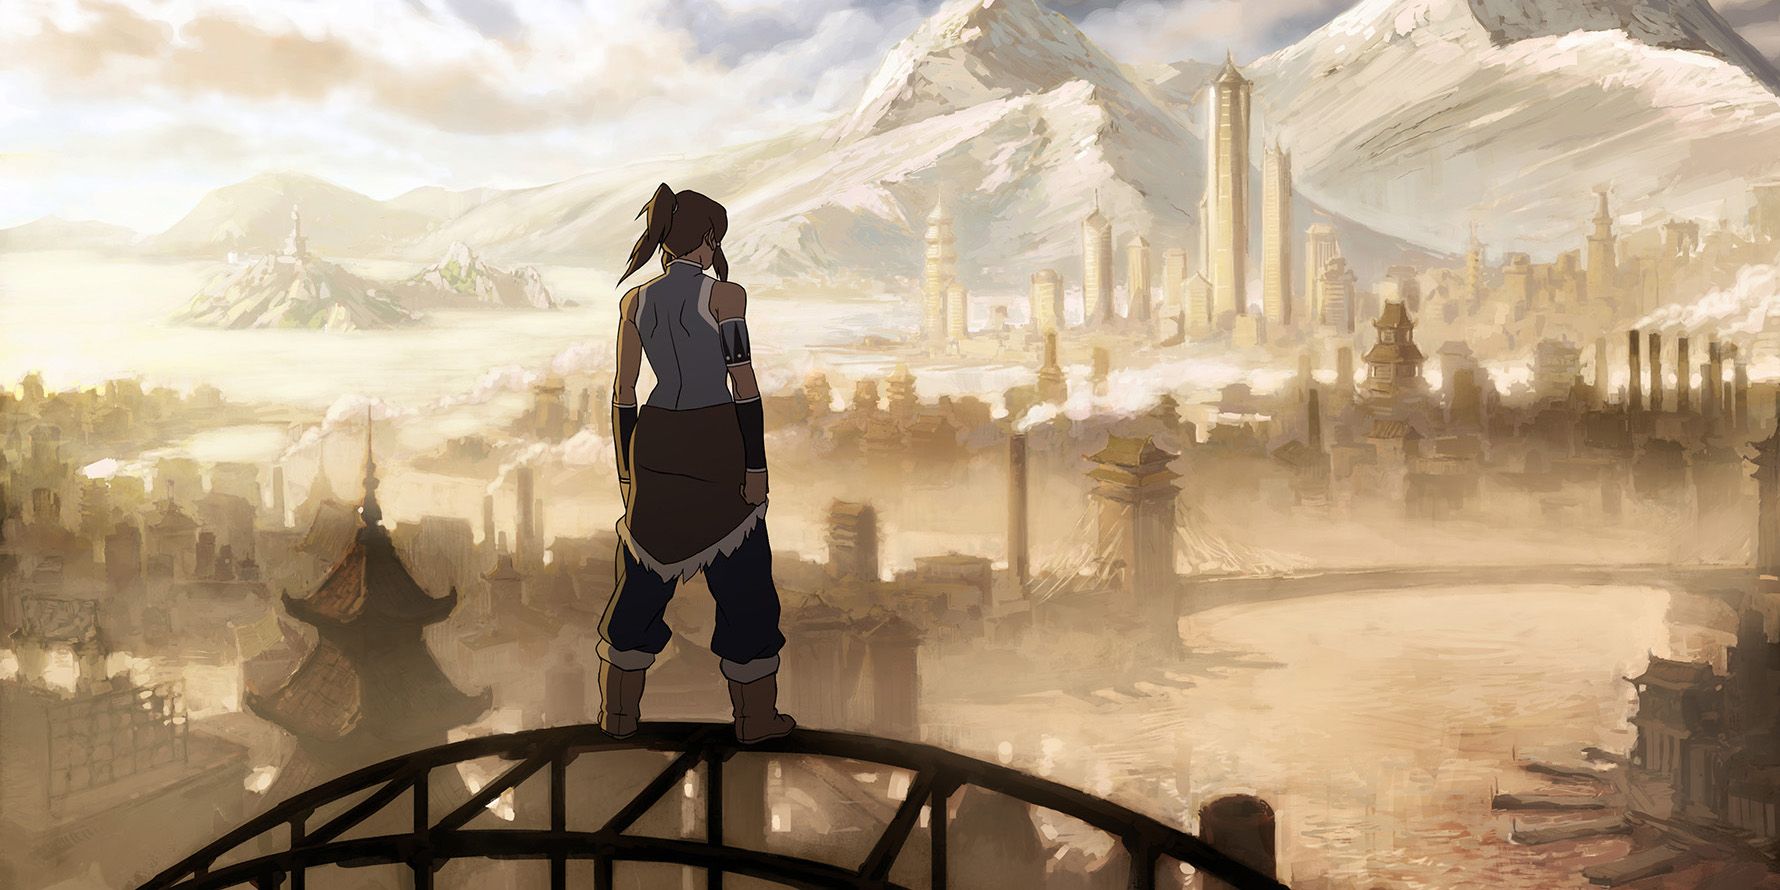 Why Legend of Korra Is BETTER Than Avatar The Last Airbender